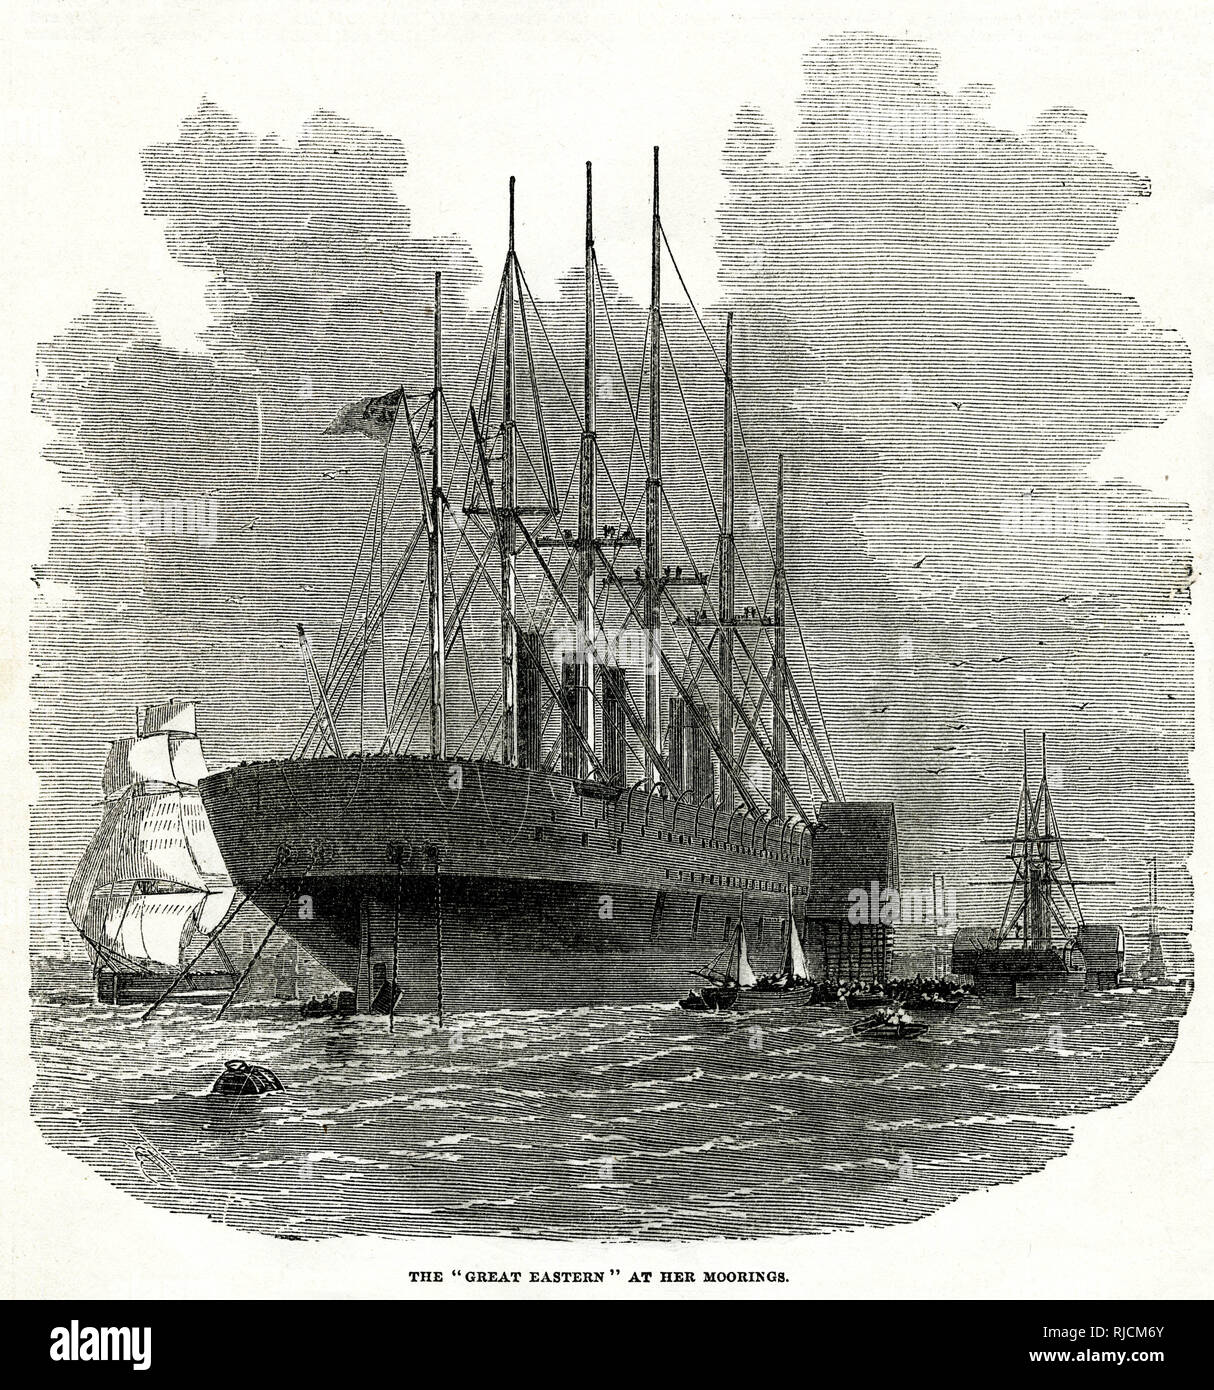 SS Great Eastern - at her moorings in Deptford 1859 Stock Photo